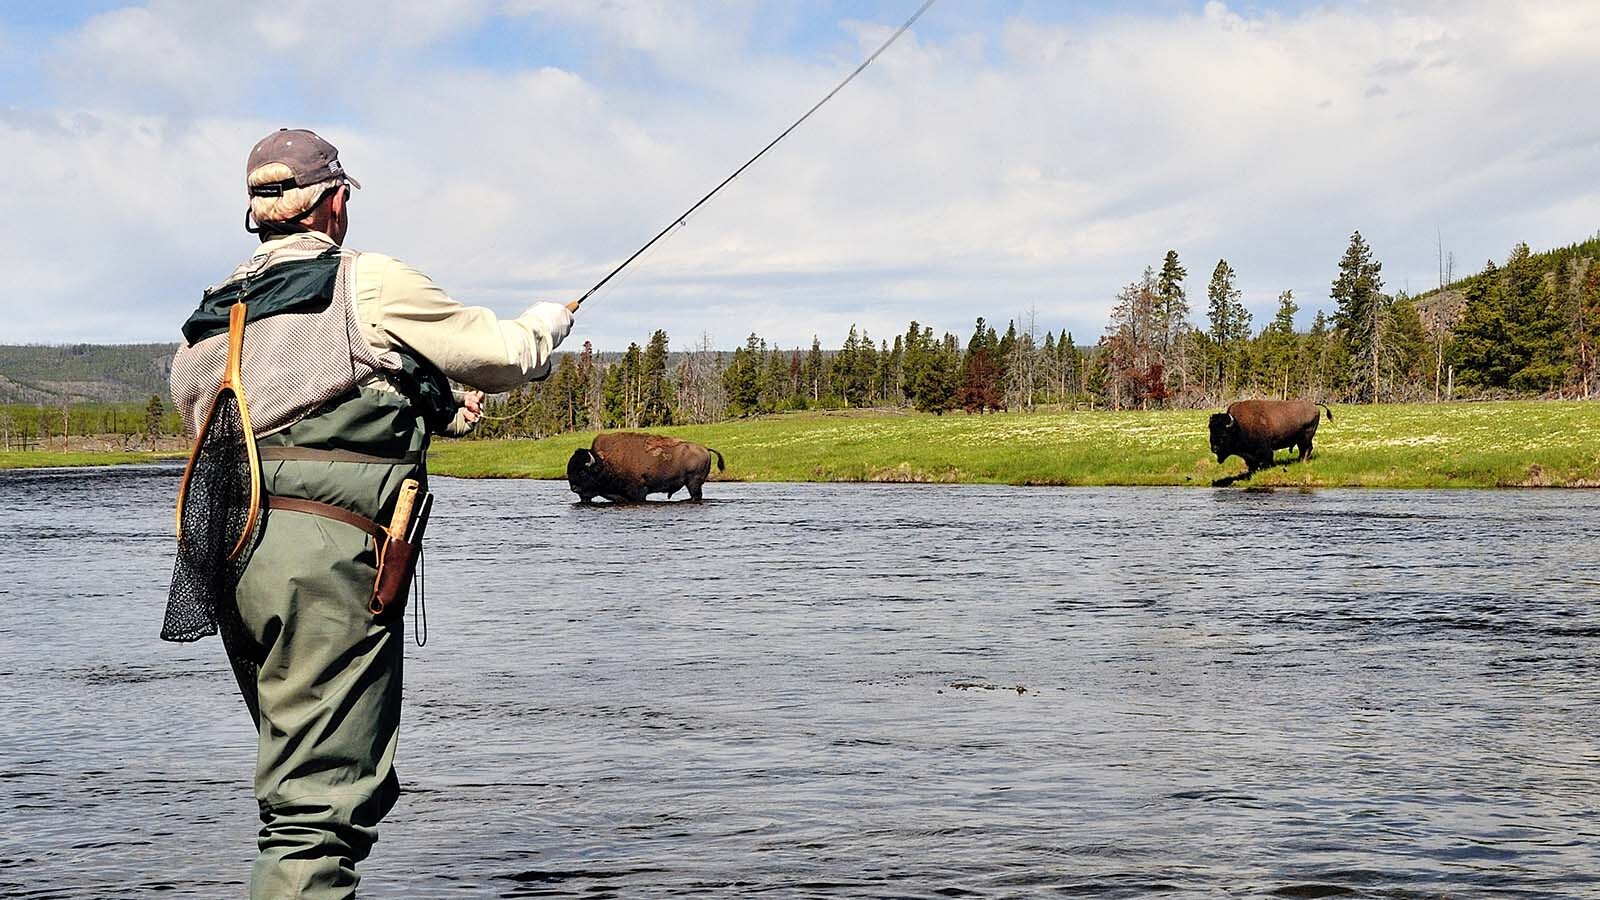 Wisconsin Anglers Get Their Guns Back – Wyoming Anglers Say They’d…